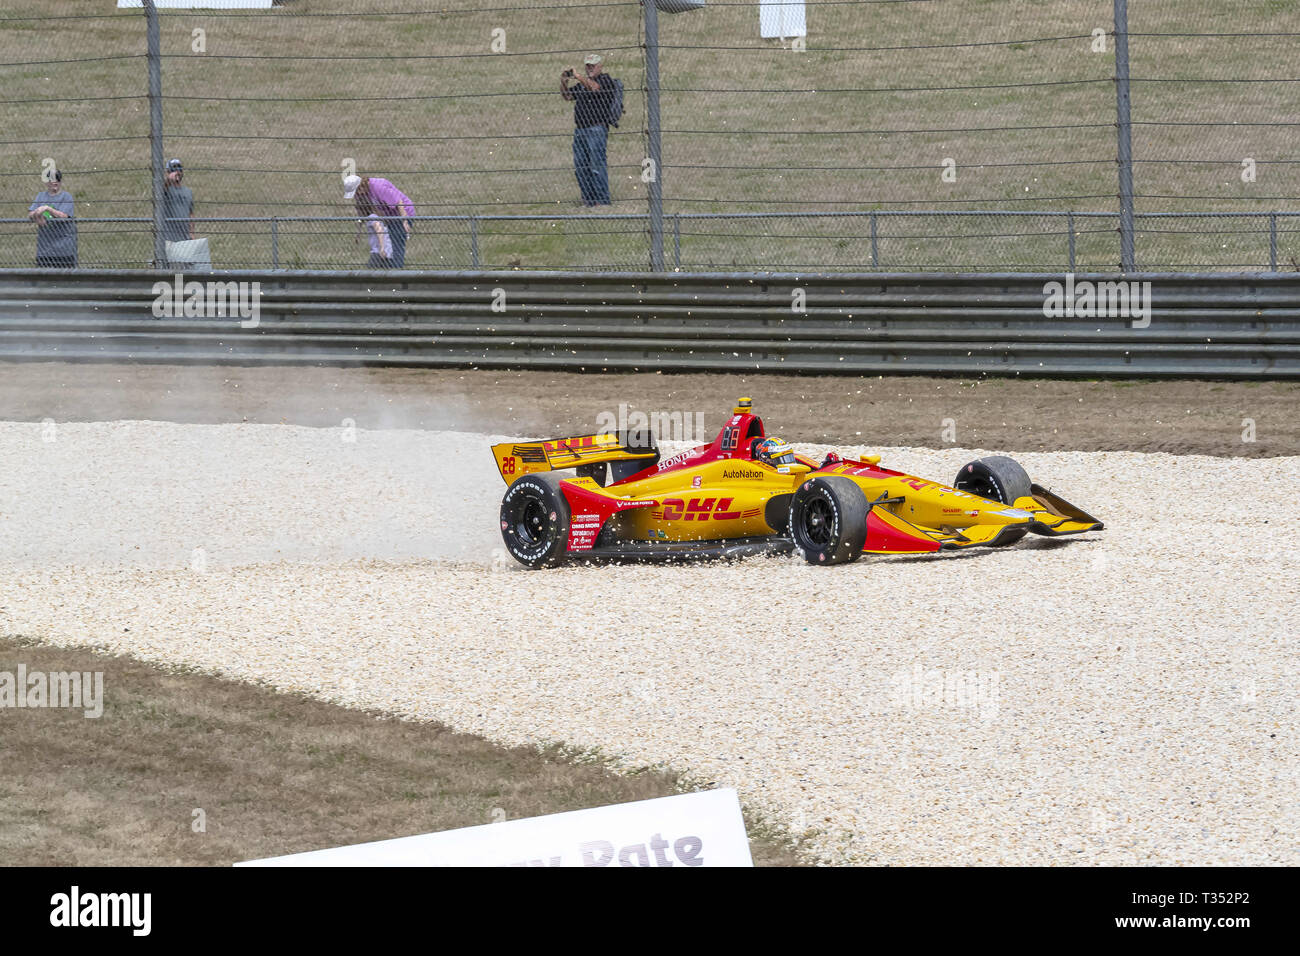 Birmingham, Alabama, USA. 6th Apr, 2019. RYAN HUNTER-REAY (28) of the United States brings out a caution as he maneuvers through through the turns during practice for the Honda Indy Grand Prix of Alabama at Barber Motorsports Park in Birmingham, Alabama. (Credit Image: © Walter G Arce Sr Asp Inc/ASP) Stock Photo